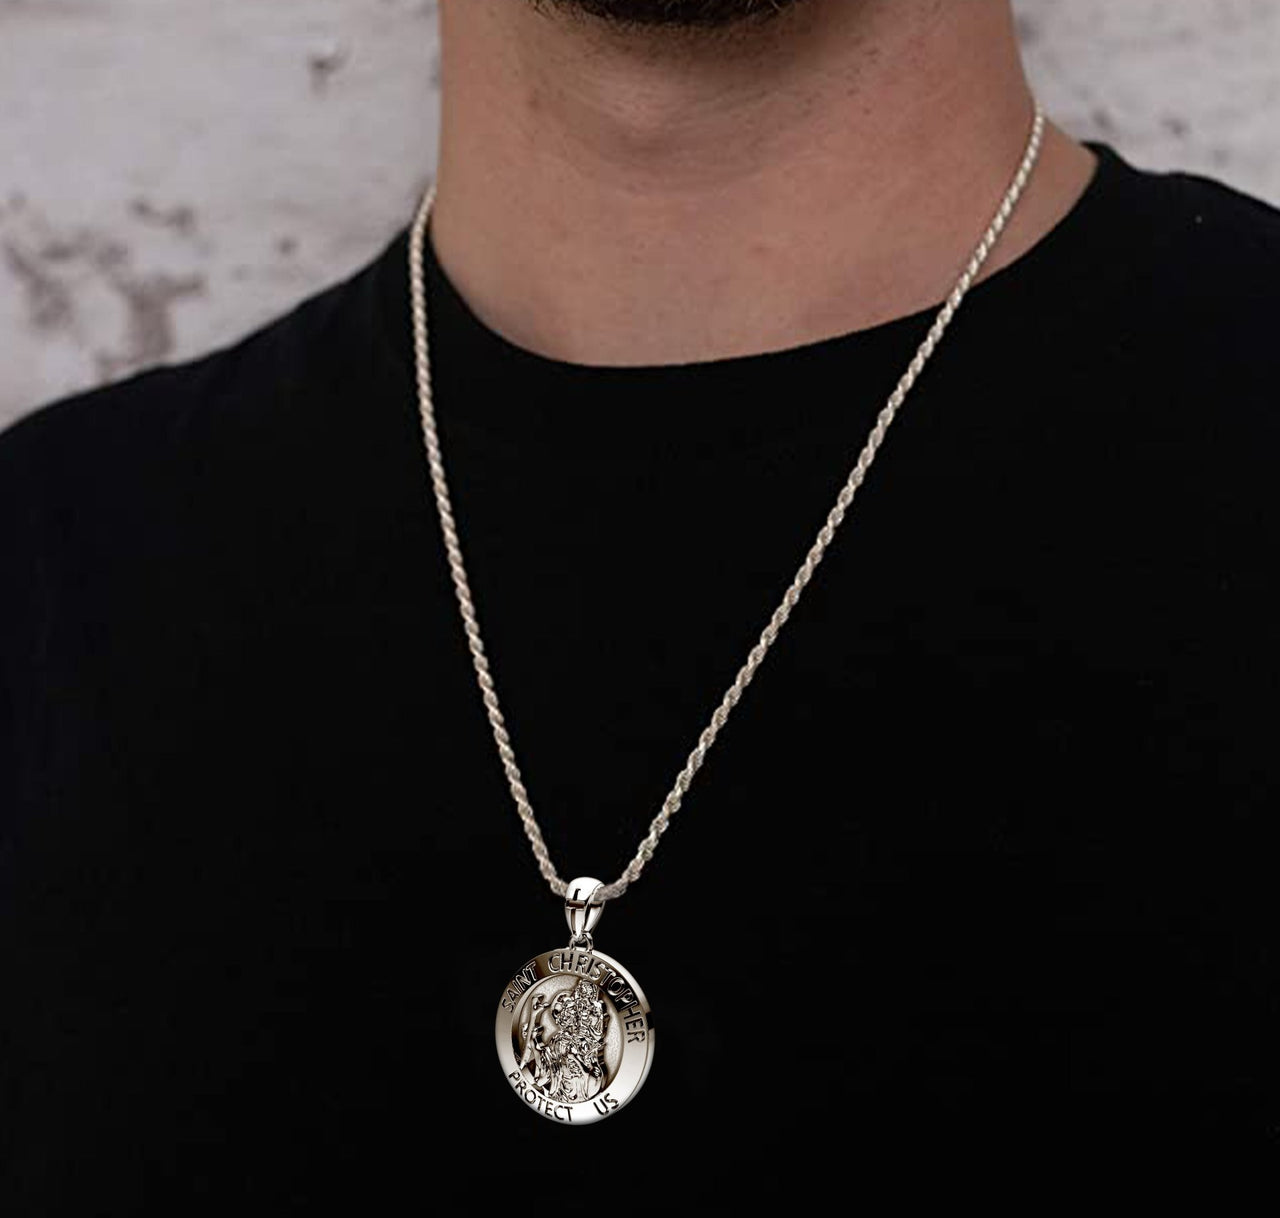 Men's XL 925 Sterling Silver 1.25in St Saint Christopher Medal Antique Finish Round Pendant Necklace, 32mm - US Jewels